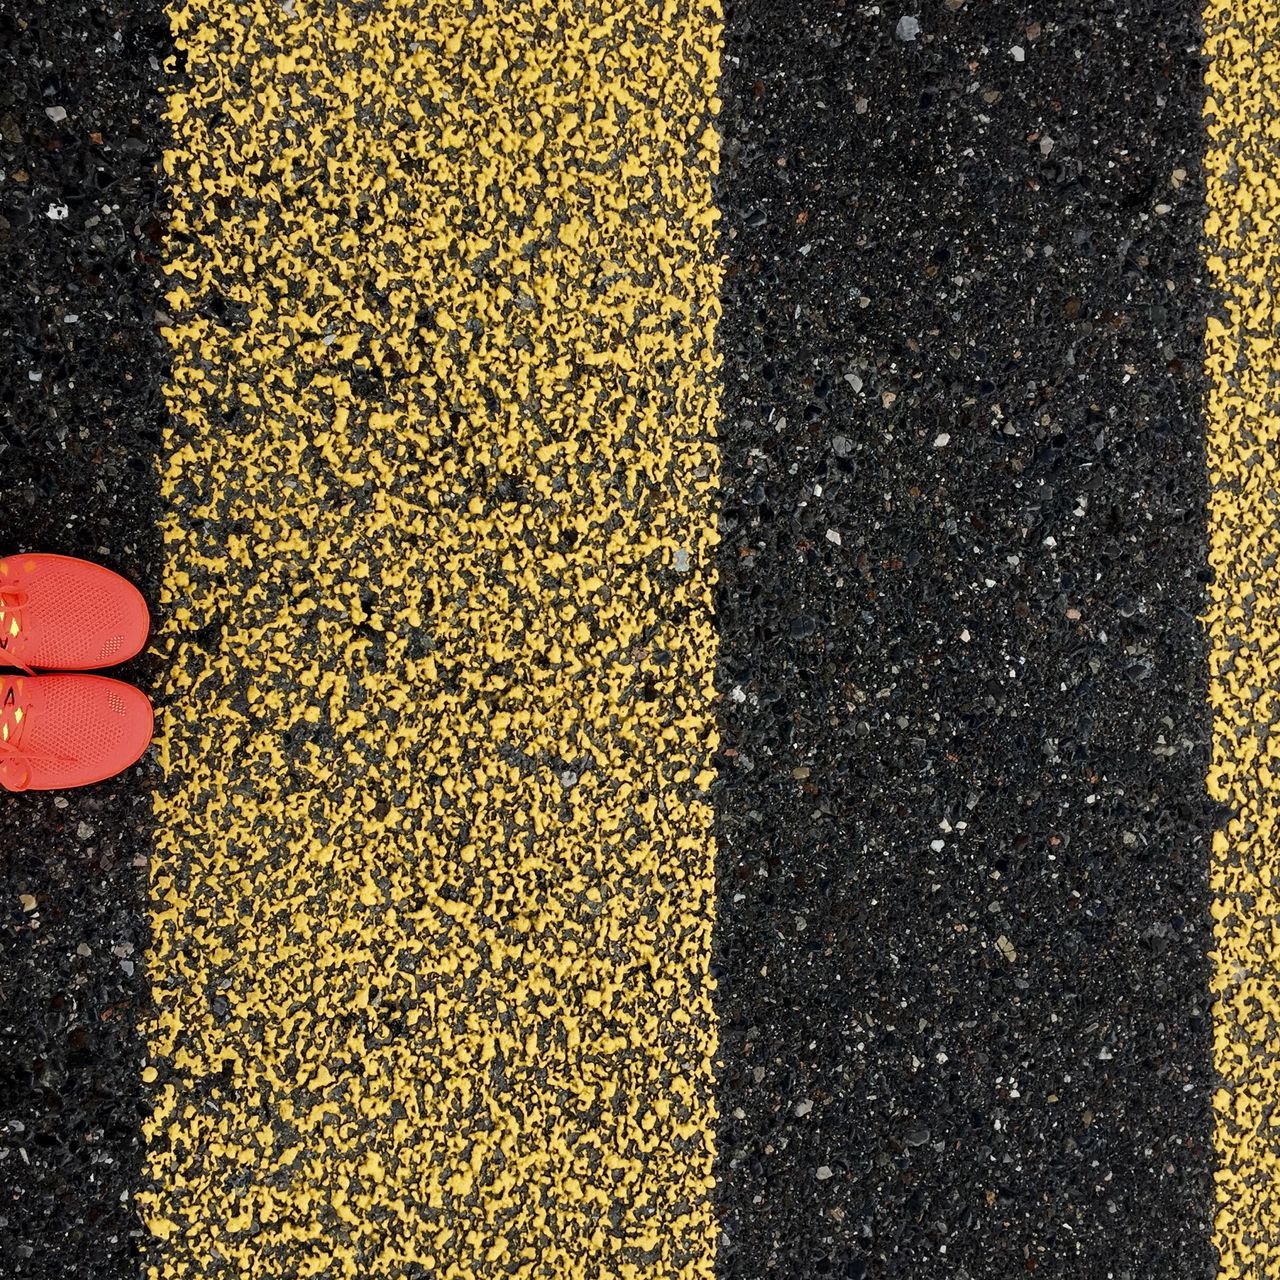 street, high angle view, asphalt, road, yellow, textured, transportation, road marking, one person, sidewalk, season, outdoors, day, full frame, red, pattern, low section, autumn, cobblestone, standing